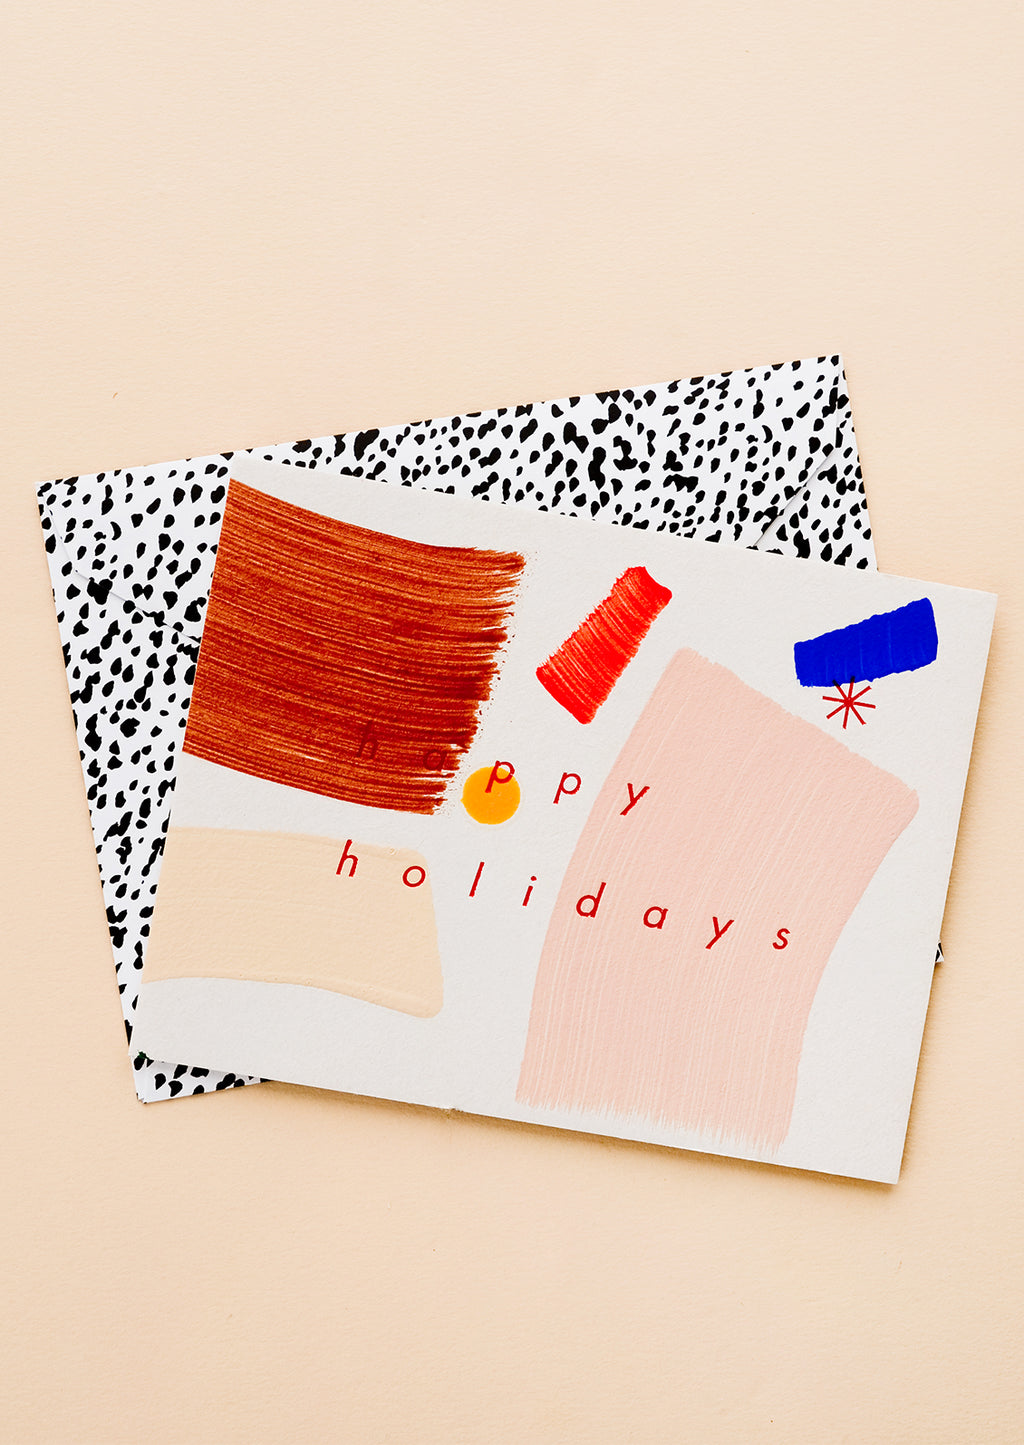 2: A greeting card with hand-painted brushstrokes and "happy holidays" in red lettering, and a black and white patterned envelope.